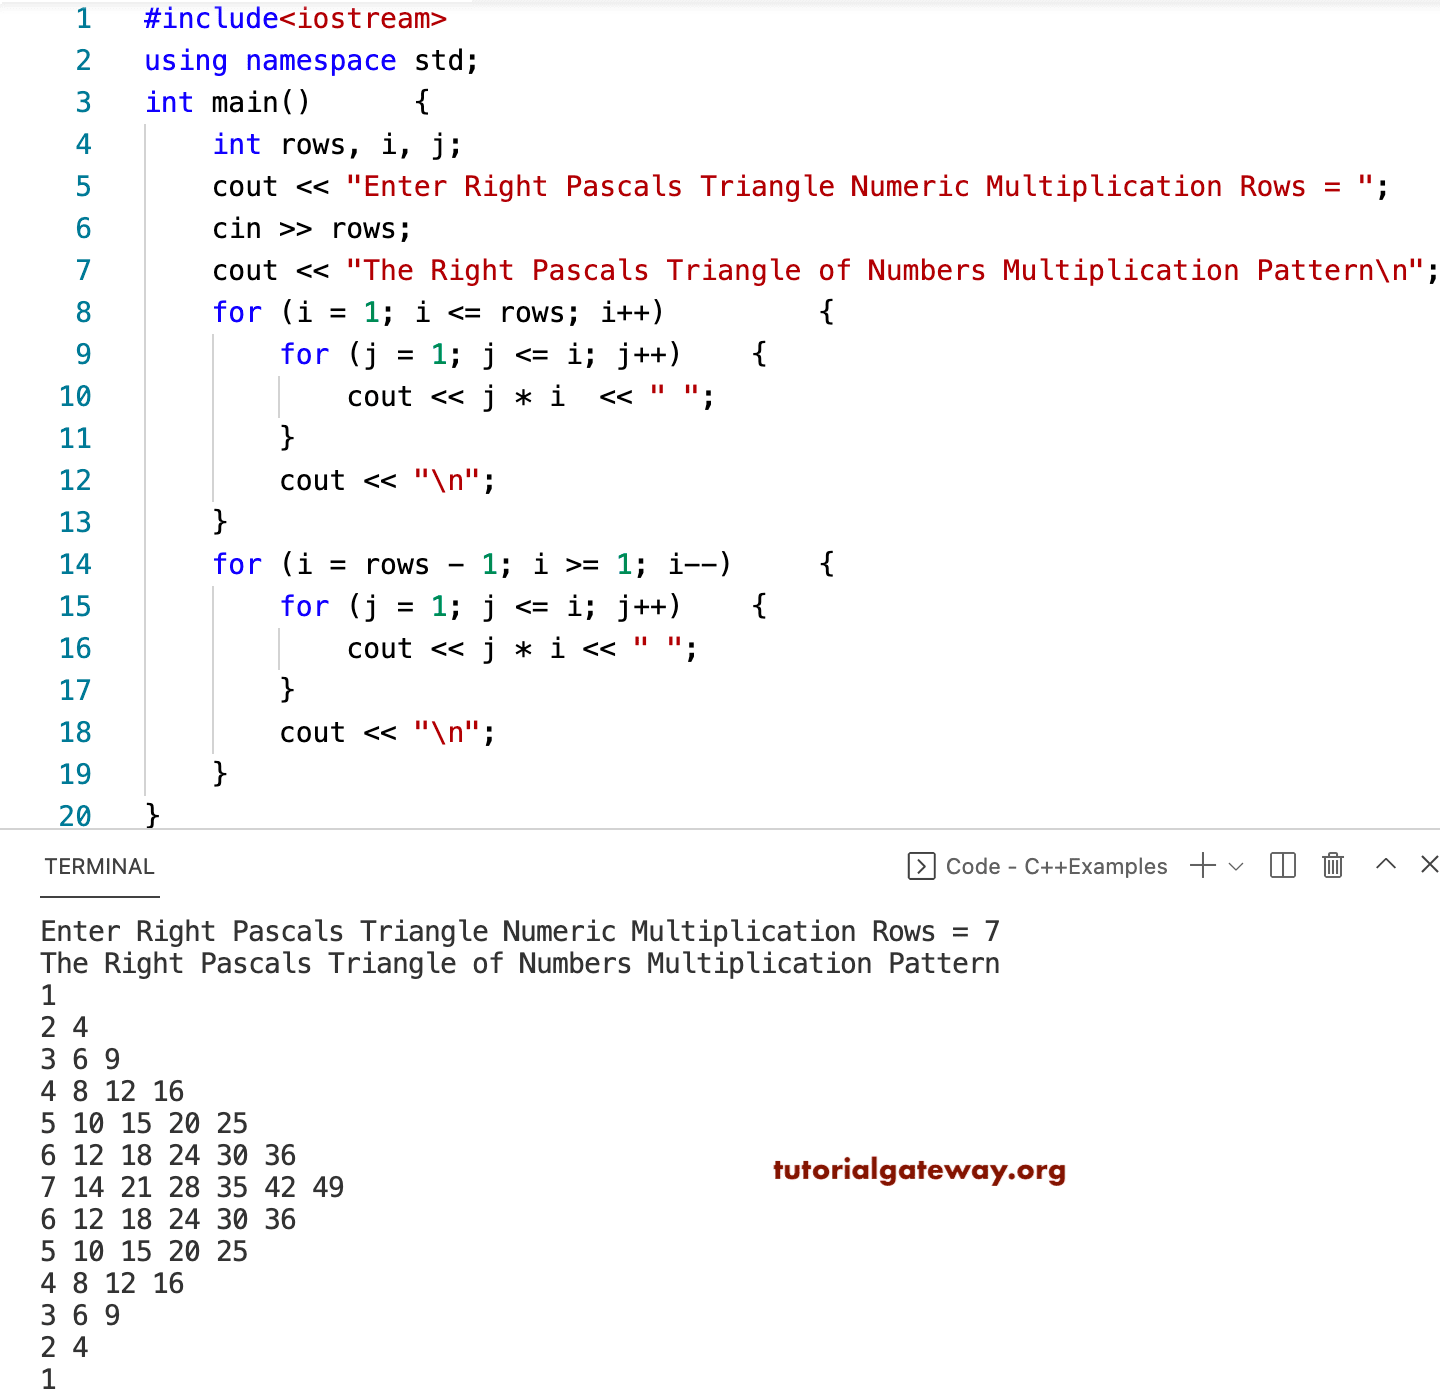 C++ Program to Print Right Pascals Triangle of Multiplication Numbers Pattern